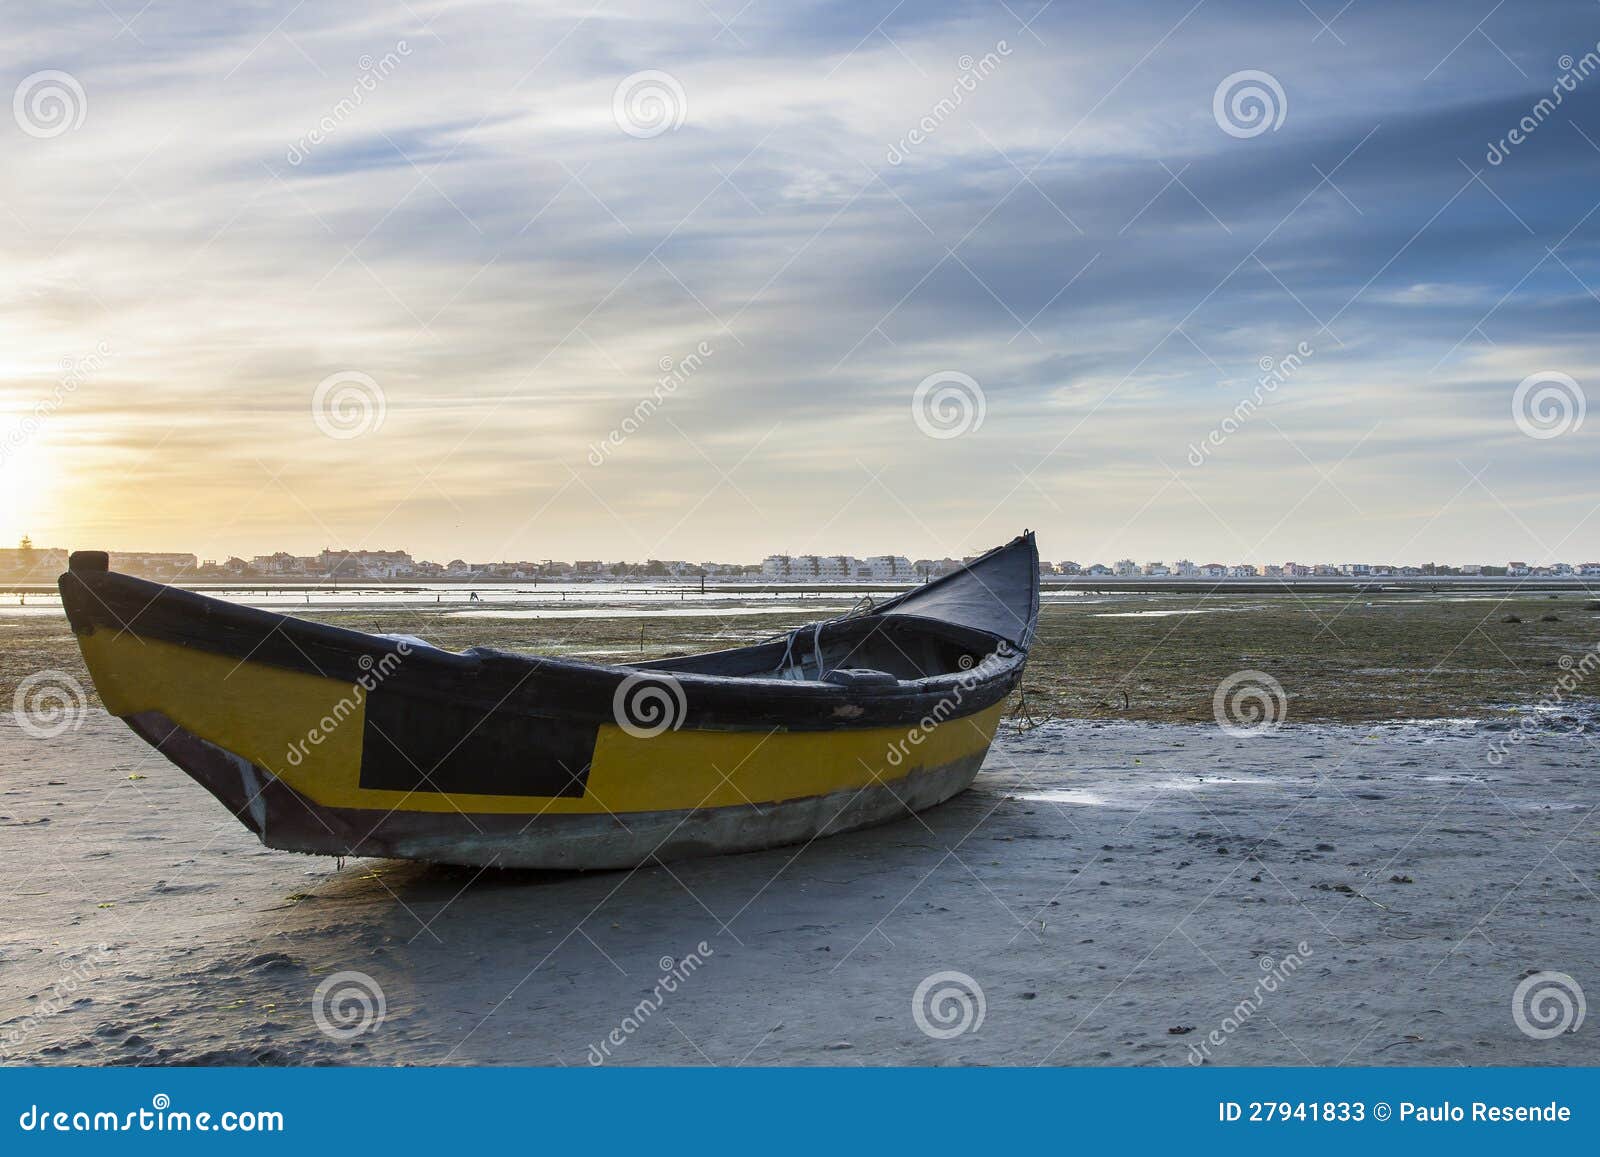 Old Wooden Boat Stock Photos - Image: 27941833